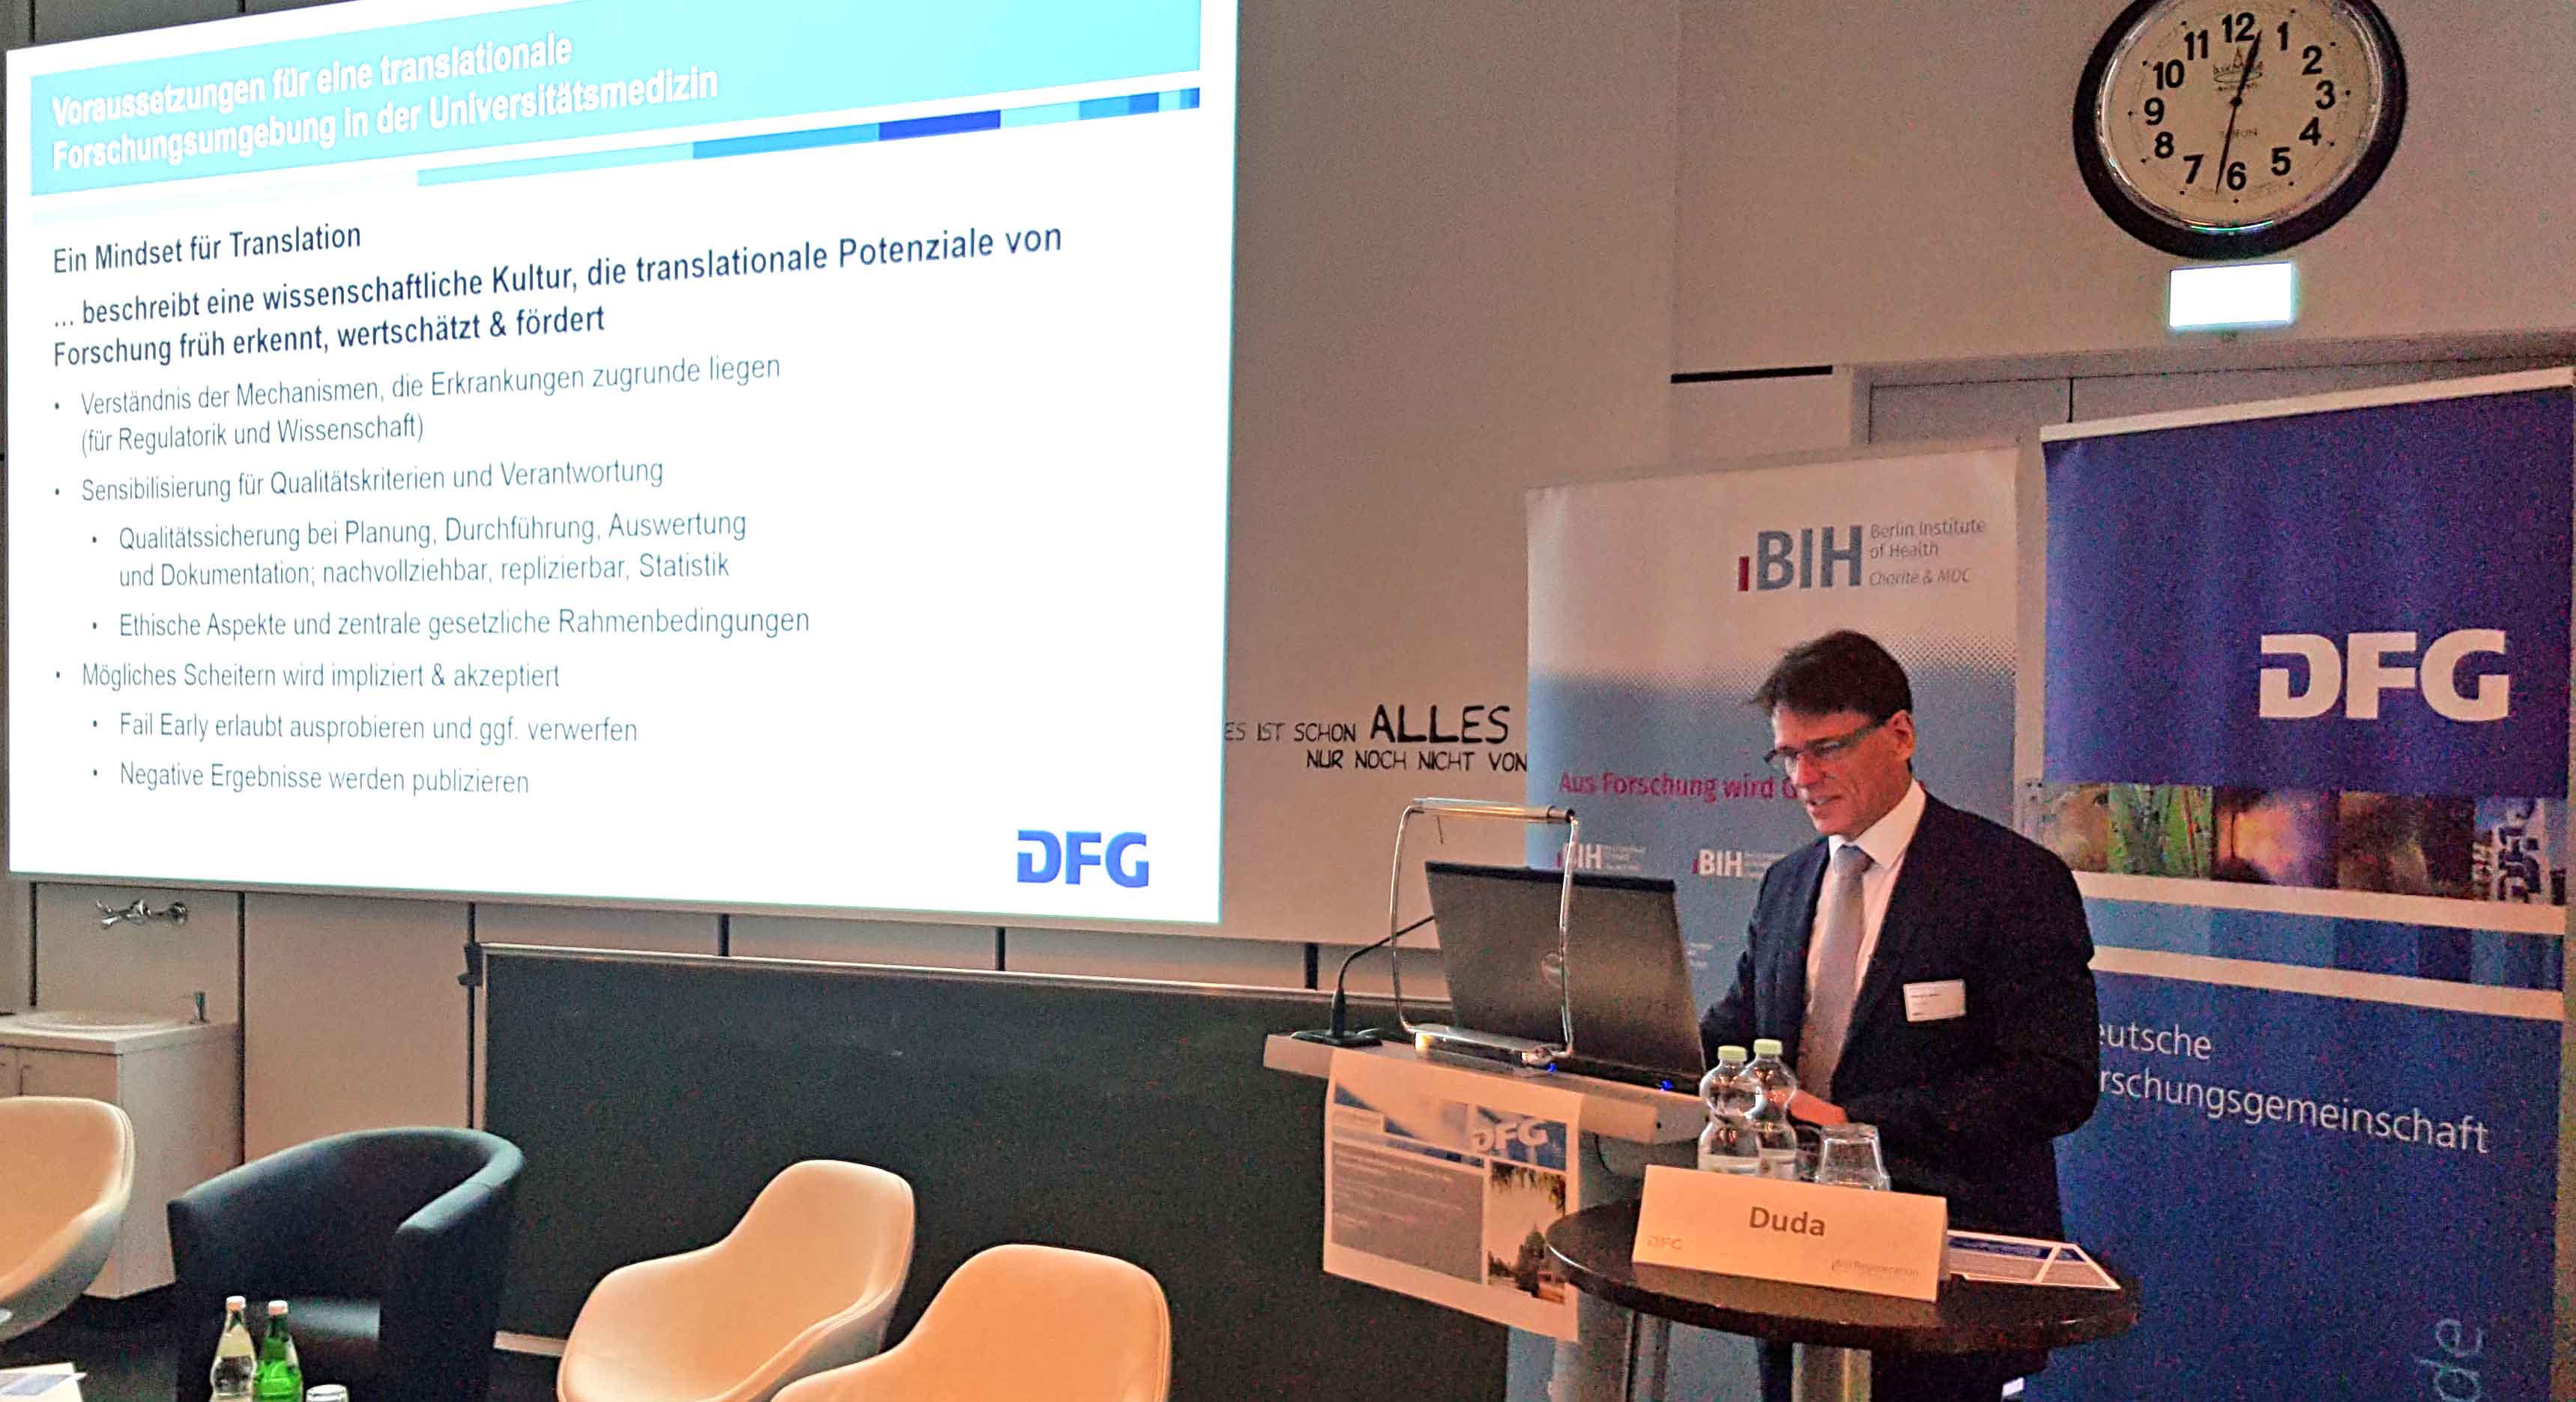 Prof. Georg Duda presents the DFG's recommendations for the funding of translational research in university medicine.